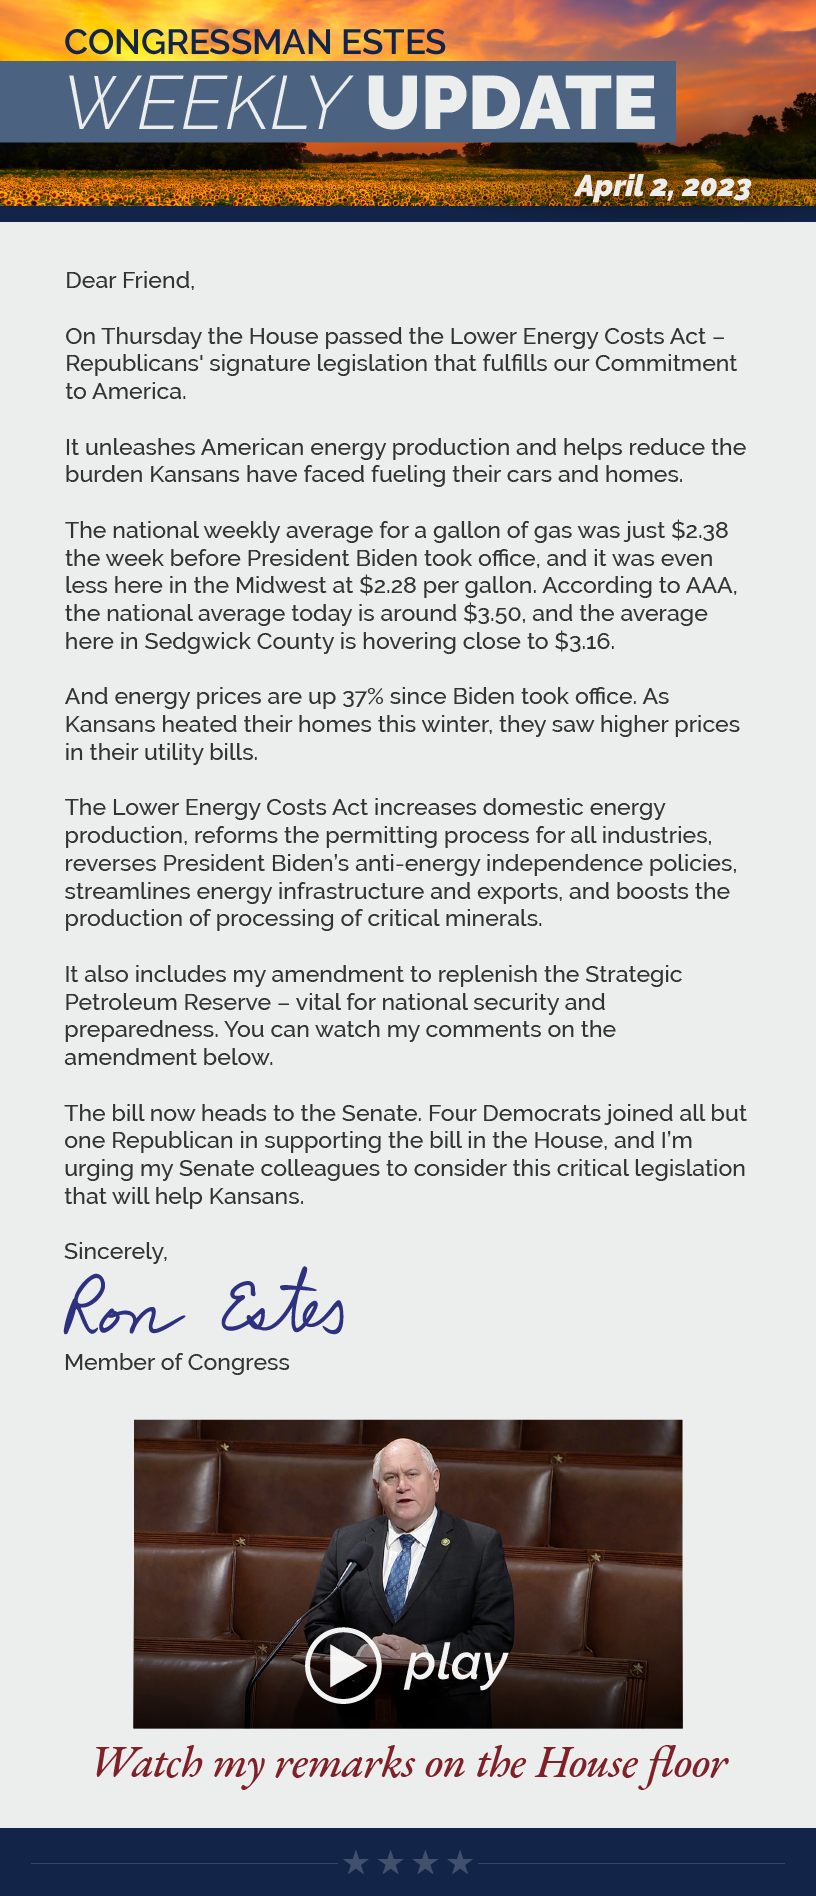 Dear Friend,  On Thursday the House passed the Lower Energy Costs Act – Republicans' signature legislation that fulfills our Commitment to America.  It unleashes American energy production and helps reduce the burden Kansans have faced fueling their cars and homes.  The national weekly average for a gallon of gas was just $2.38 the week before President Biden took office, and it was even less here in the Midwest at $2.28 per gallon. According to AAA, the national average today is around $3.50, and the average here in Sedgwick County is hovering close to $3.16.  And energy prices are up 37% since Biden took office. As Kansans heated their homes this winter, they saw higher prices in their utility bills.  The Lower Energy Costs Act increases domestic energy production, reforms the permitting process for all industries, reverses President Biden’s anti-energy independence policies, streamlines energy infrastructure and exports, and boosts the production of processing of critical minerals.  It also includes my amendment to replenish the Strategic Petroleum Reserve – vital for national security and preparedness. You can watch my comments on the amendment below.  The bill now heads to the Senate. Four Democrats joined all but one Republican in supporting the bill in the House, and I’m urging my Senate colleagues to consider this critical legislation that will help Kansans.  Sincerely, Ron Estes